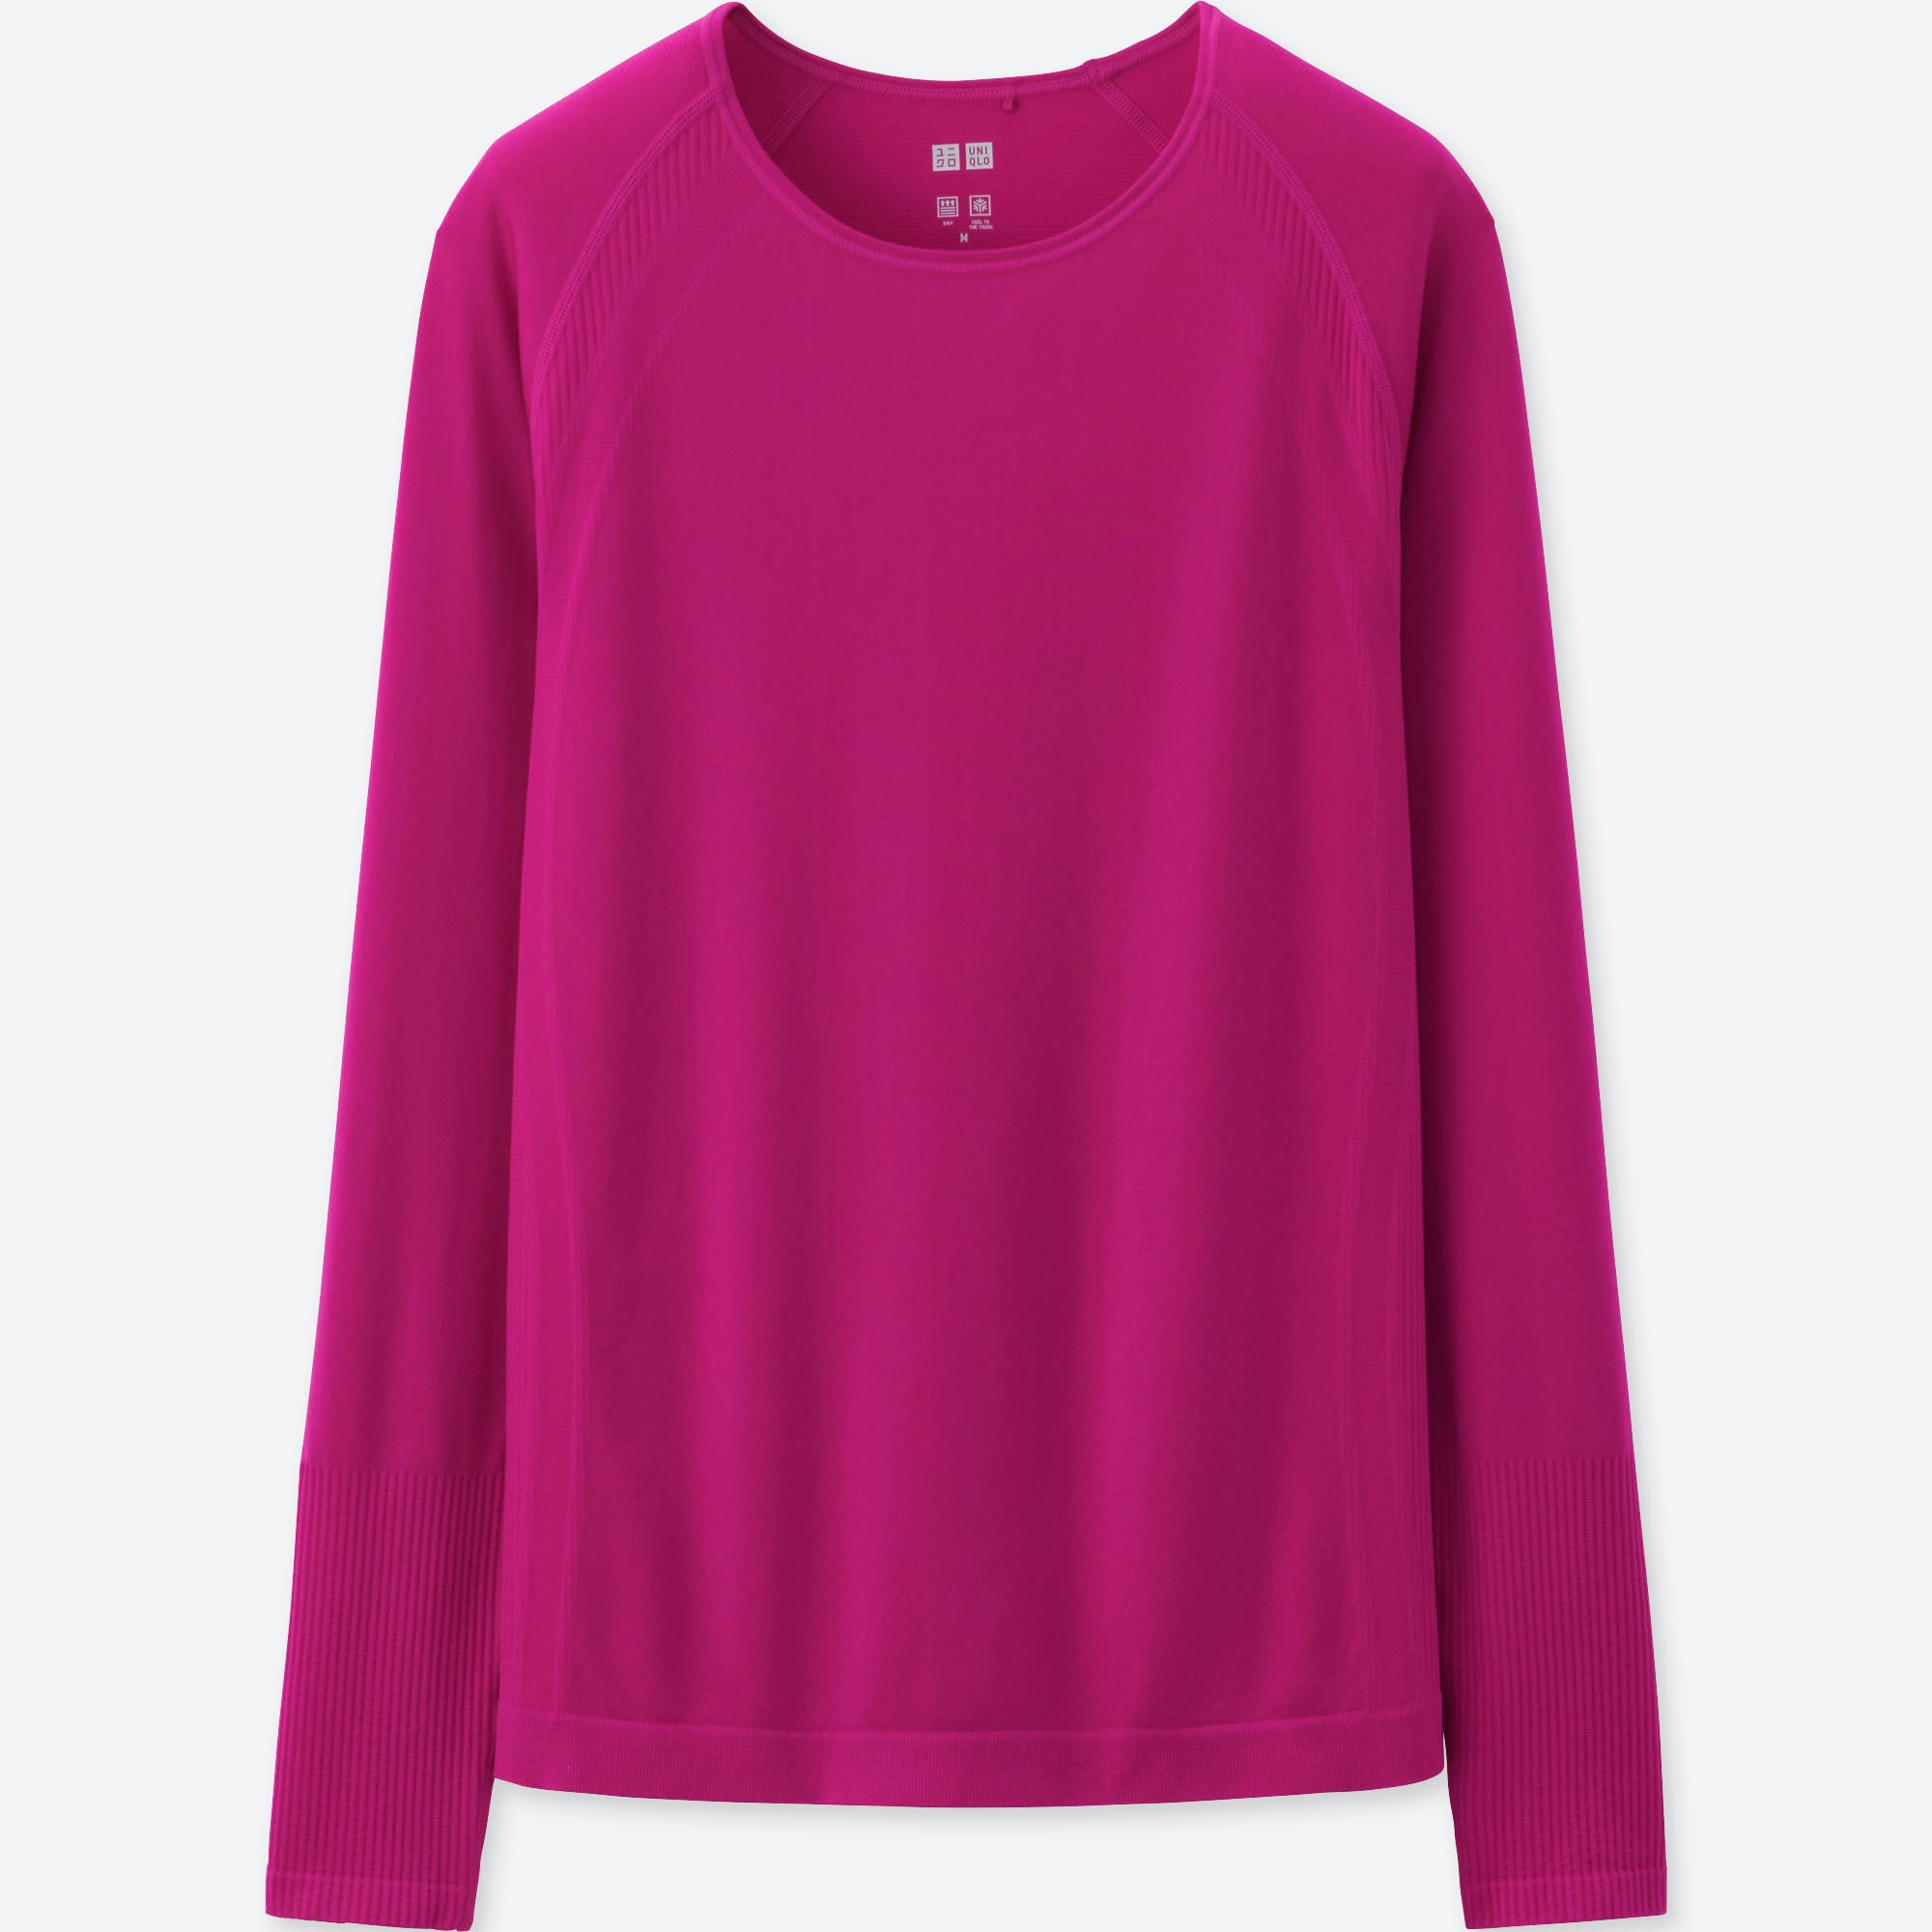 Airism long sleeve uniqlo clothes women for work